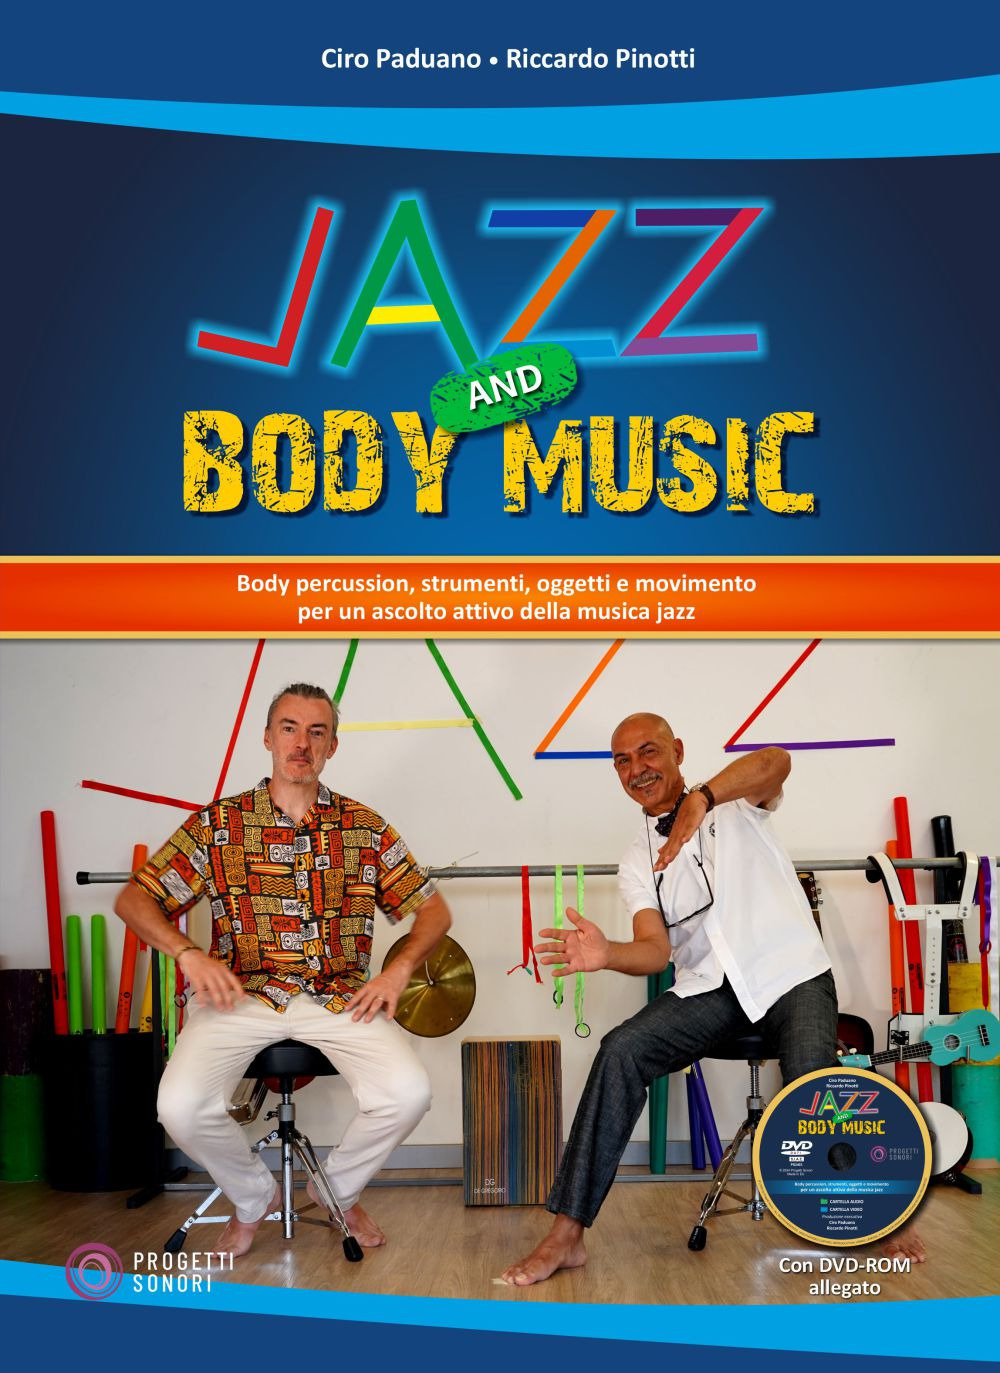 Jazz and body music. Con DVD-ROM